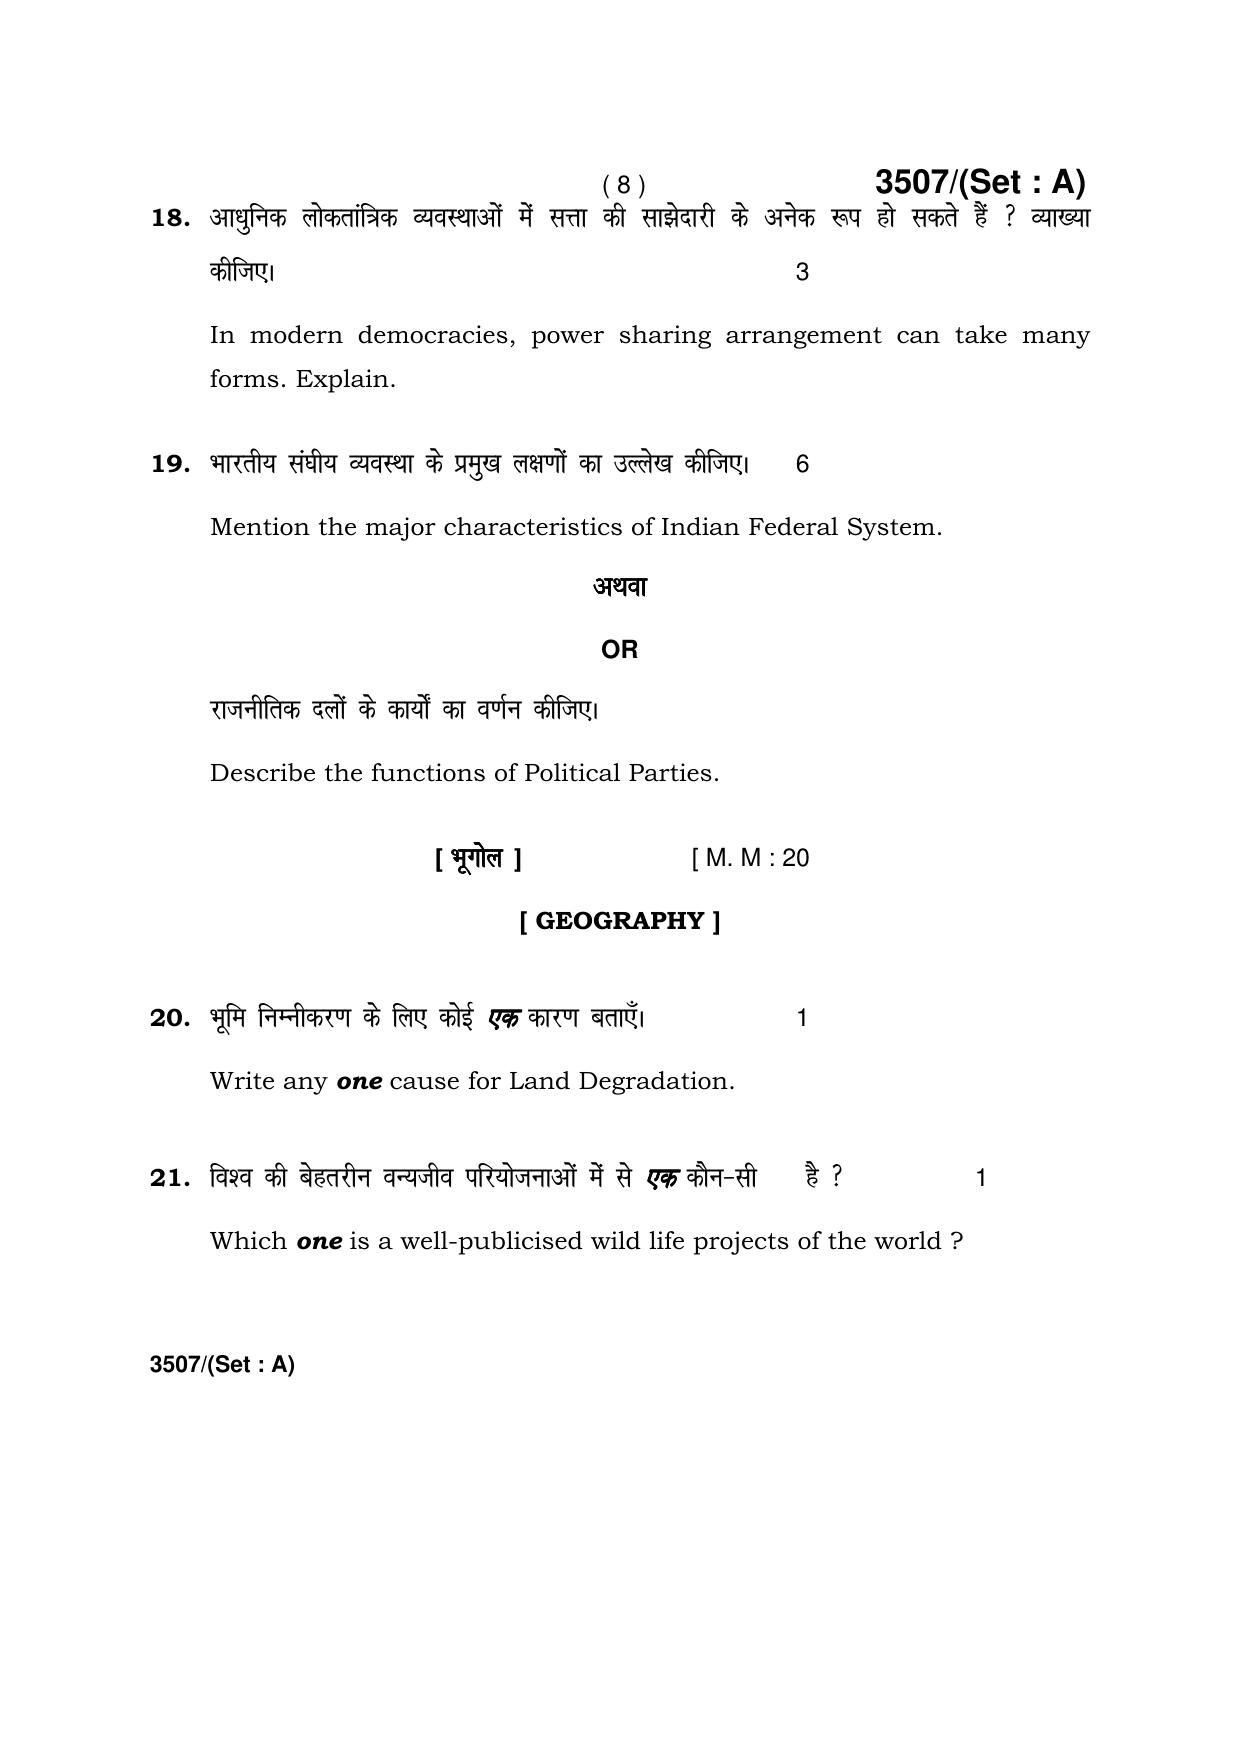 Haryana Board HBSE Class 10 Social Science -A 2018 Question Paper - Page 8